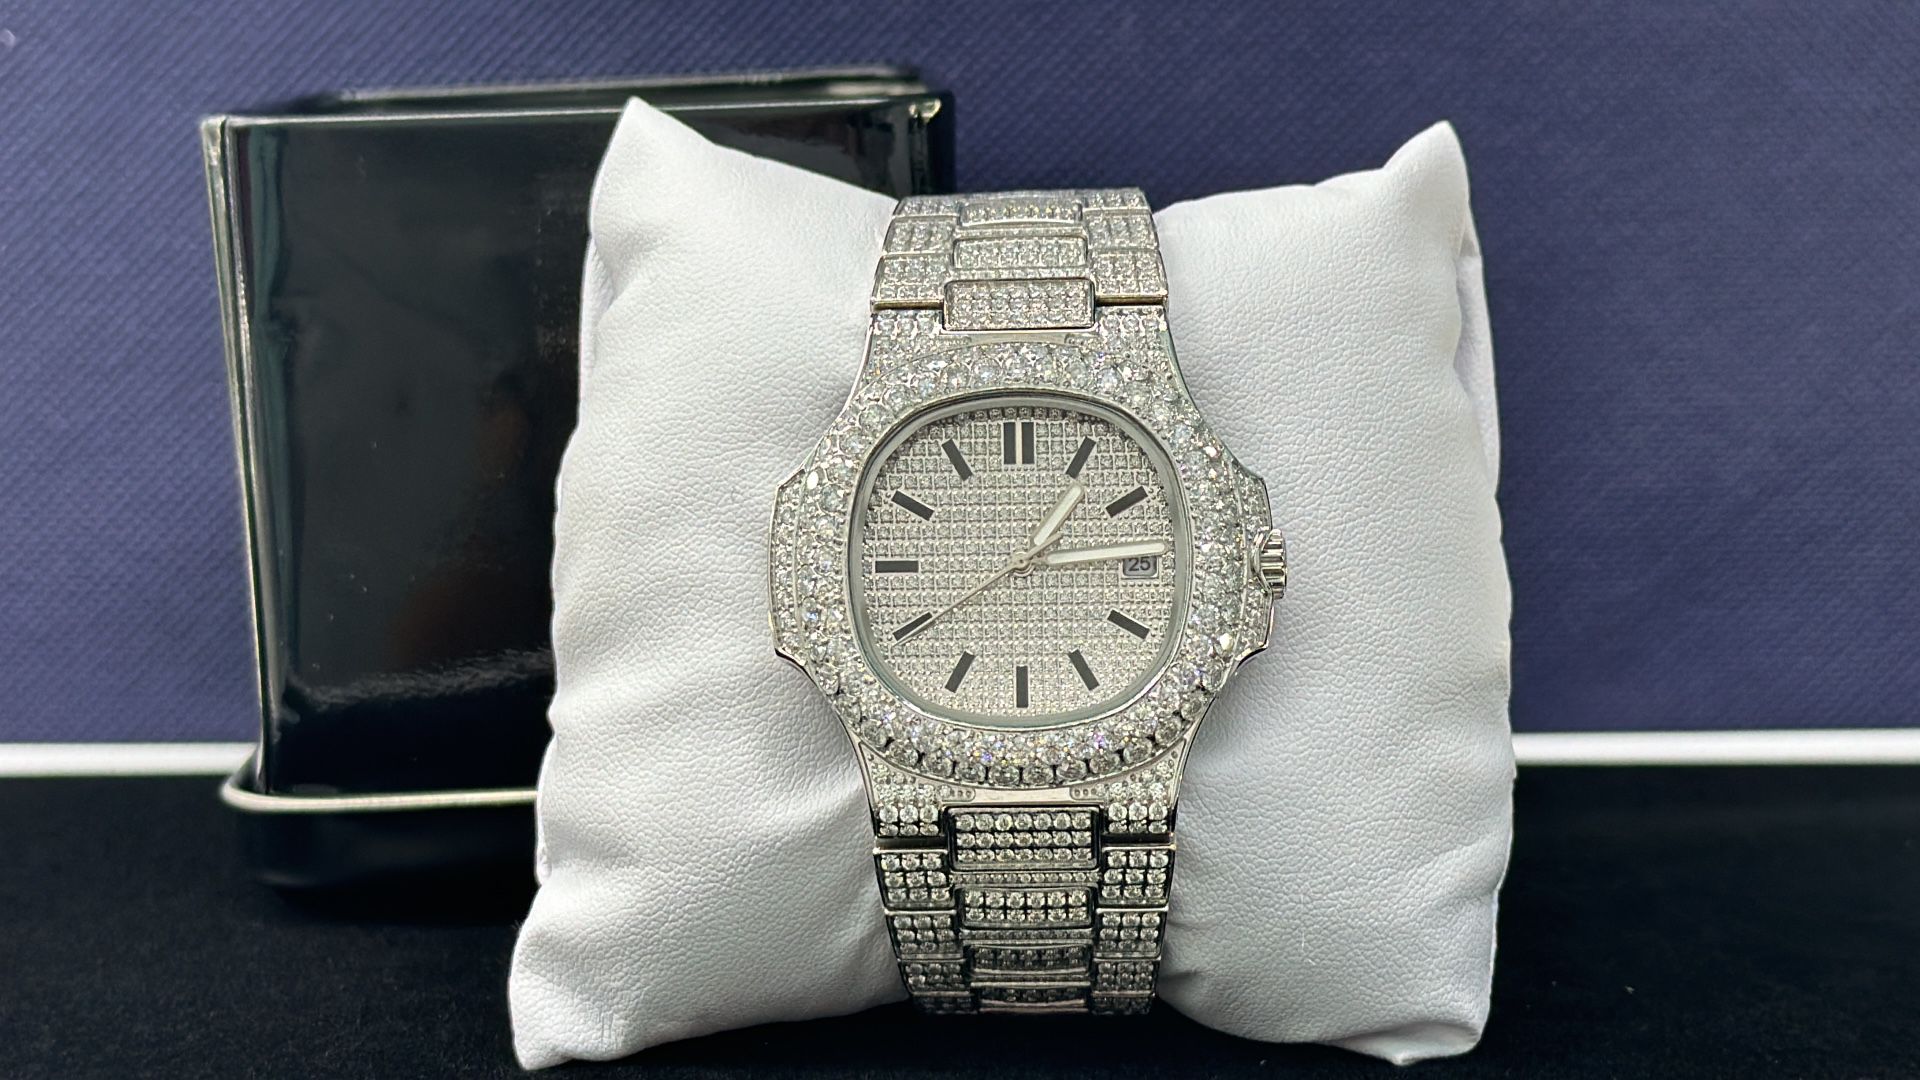 Stainless Steel Moissanite (silver) Watch